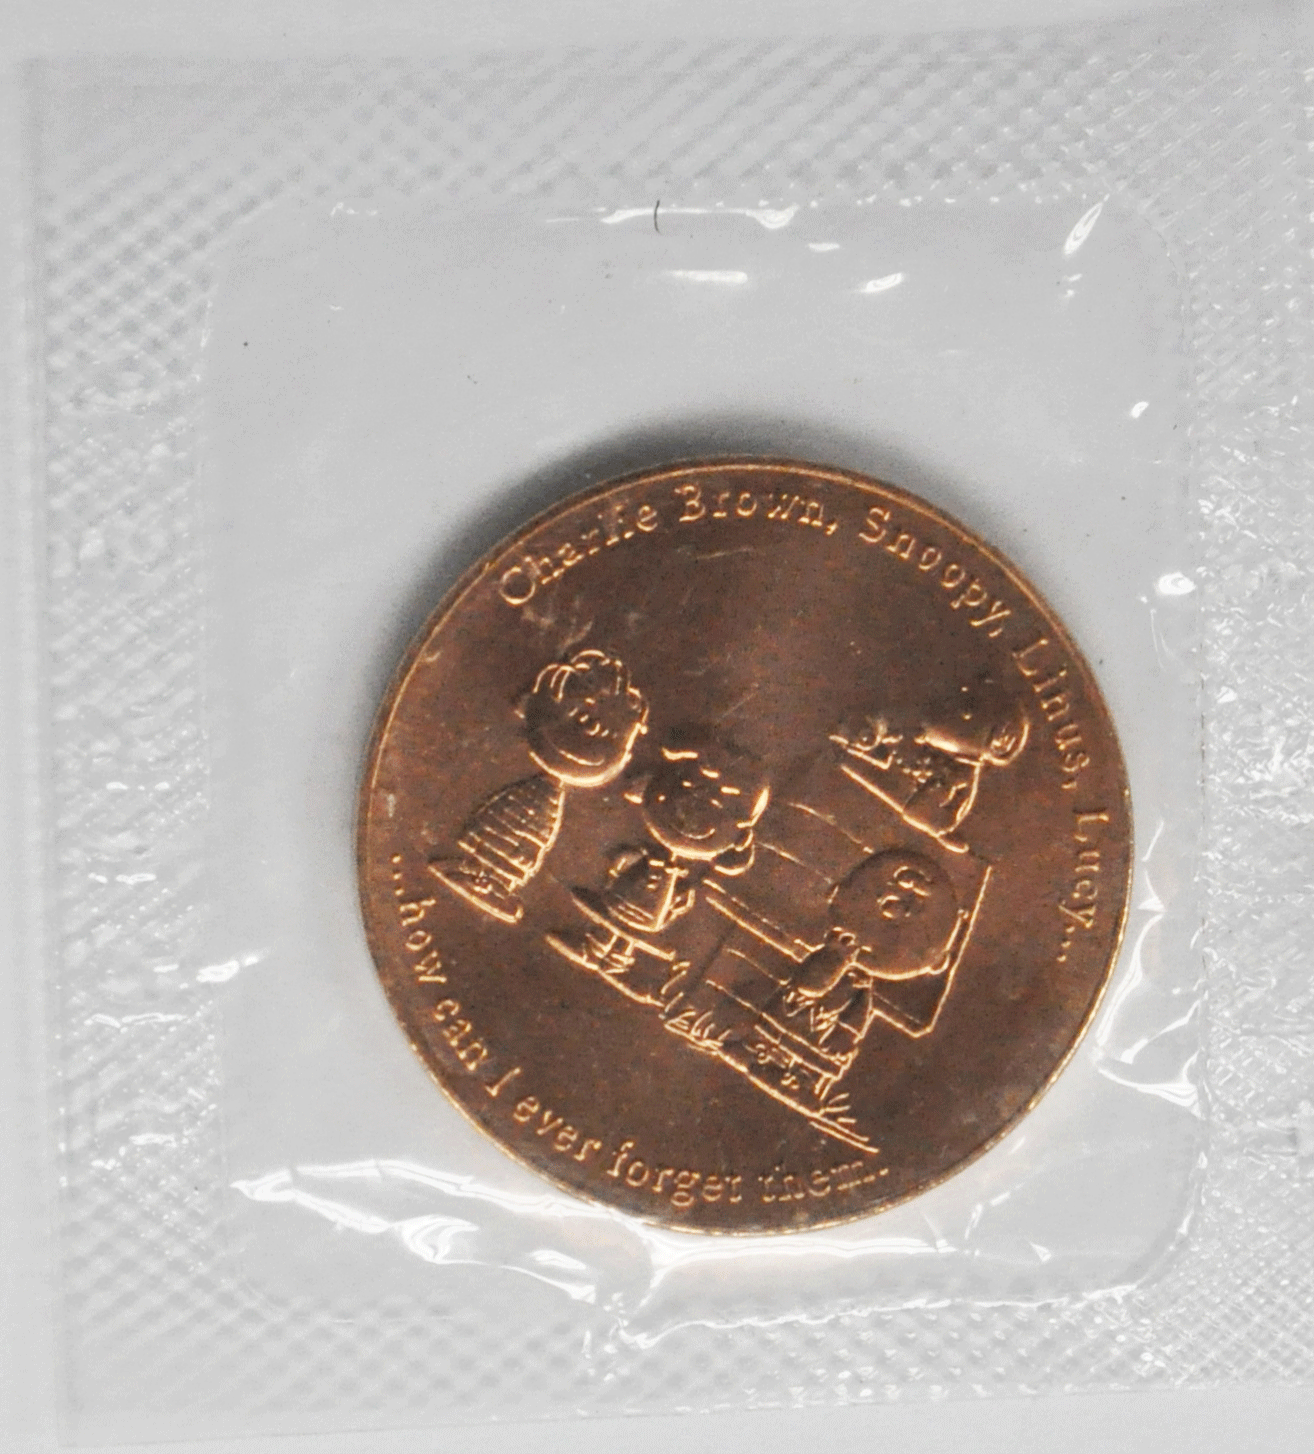 Act of Congress 2000 Schulz Charlie Brown Snoopy Medal Sealed 38mm